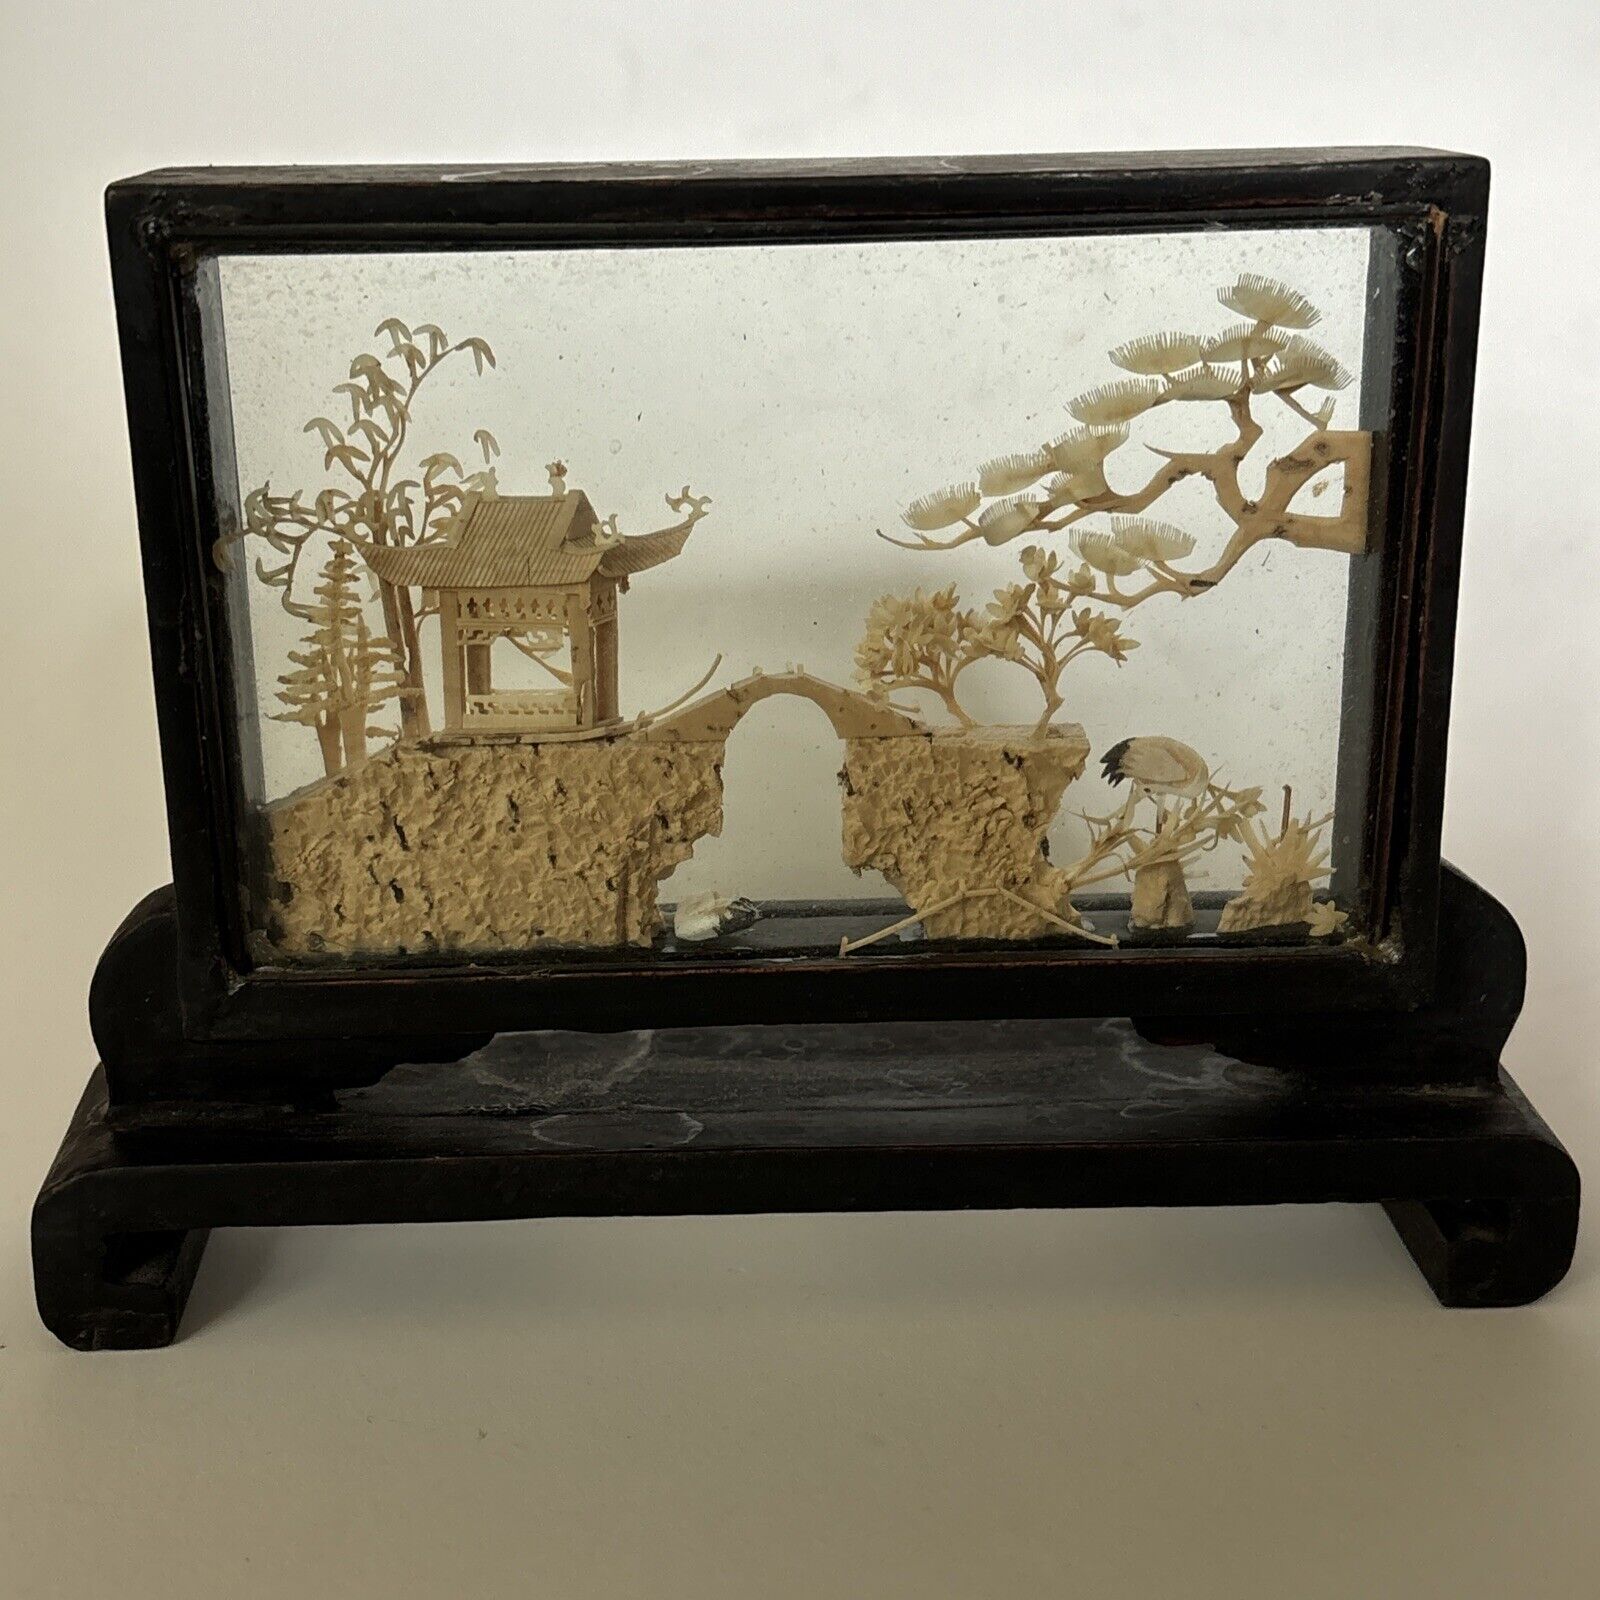 Vintage Chinese Cork And Wood Lacquer Diorama Display Home Decorative